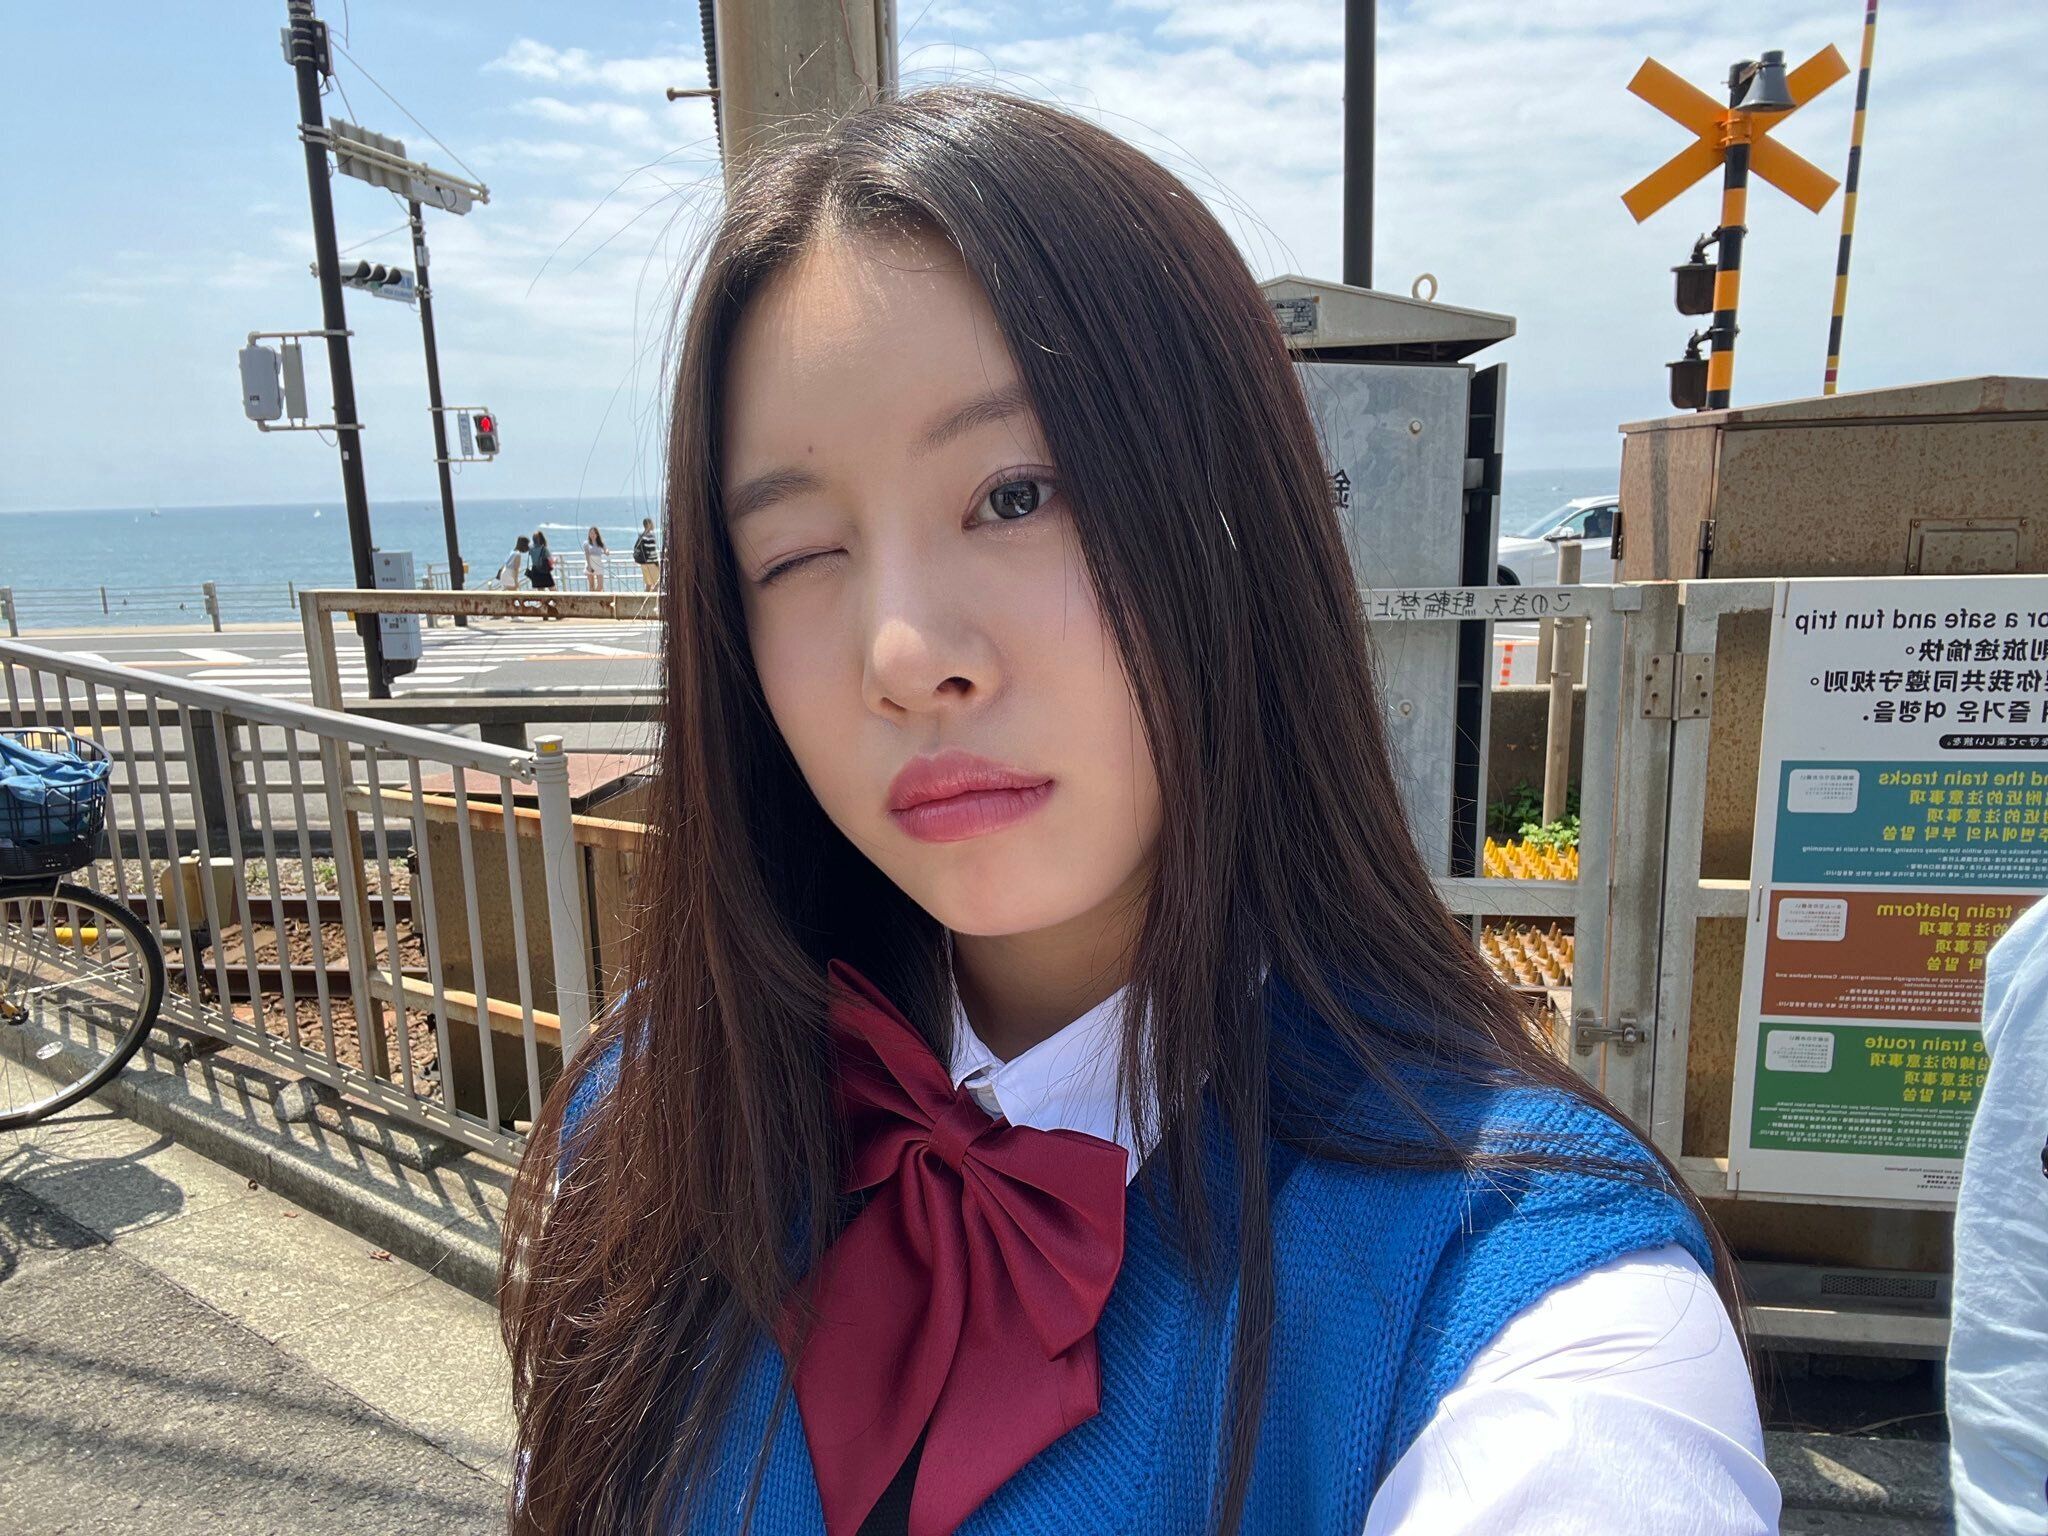 A selfie of a woman with long dark hair, wearing a blue and white school uniform. - FIFTY FIFTY